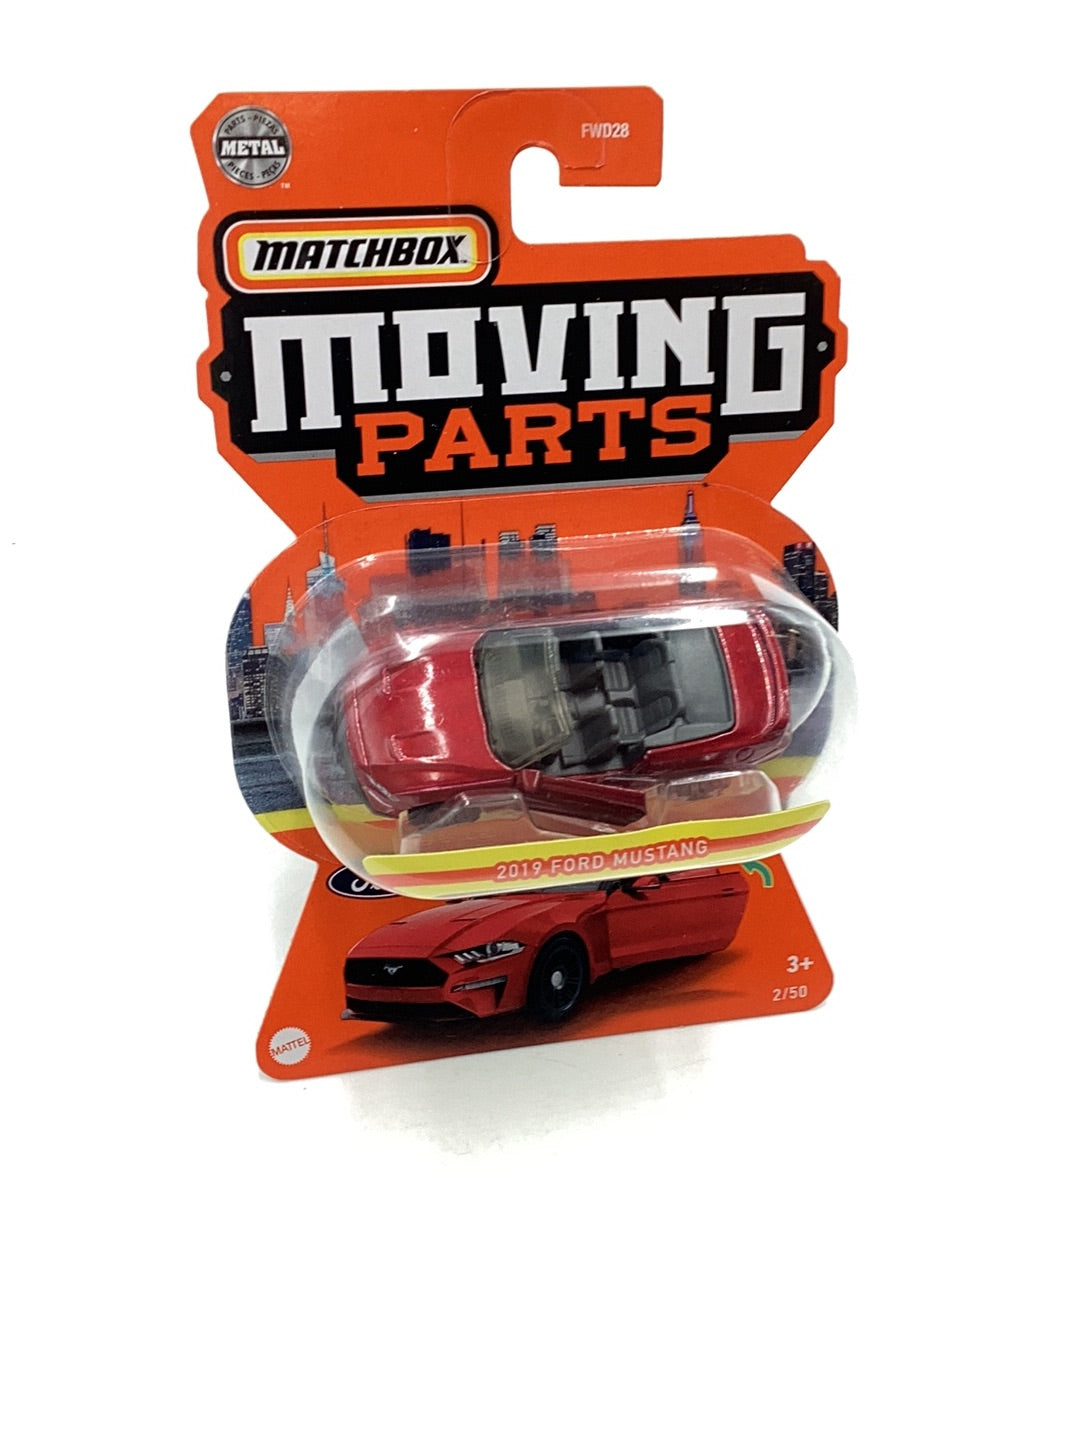 Matchbox Moving Parts 2019 Ford Mustang 2/50 165I